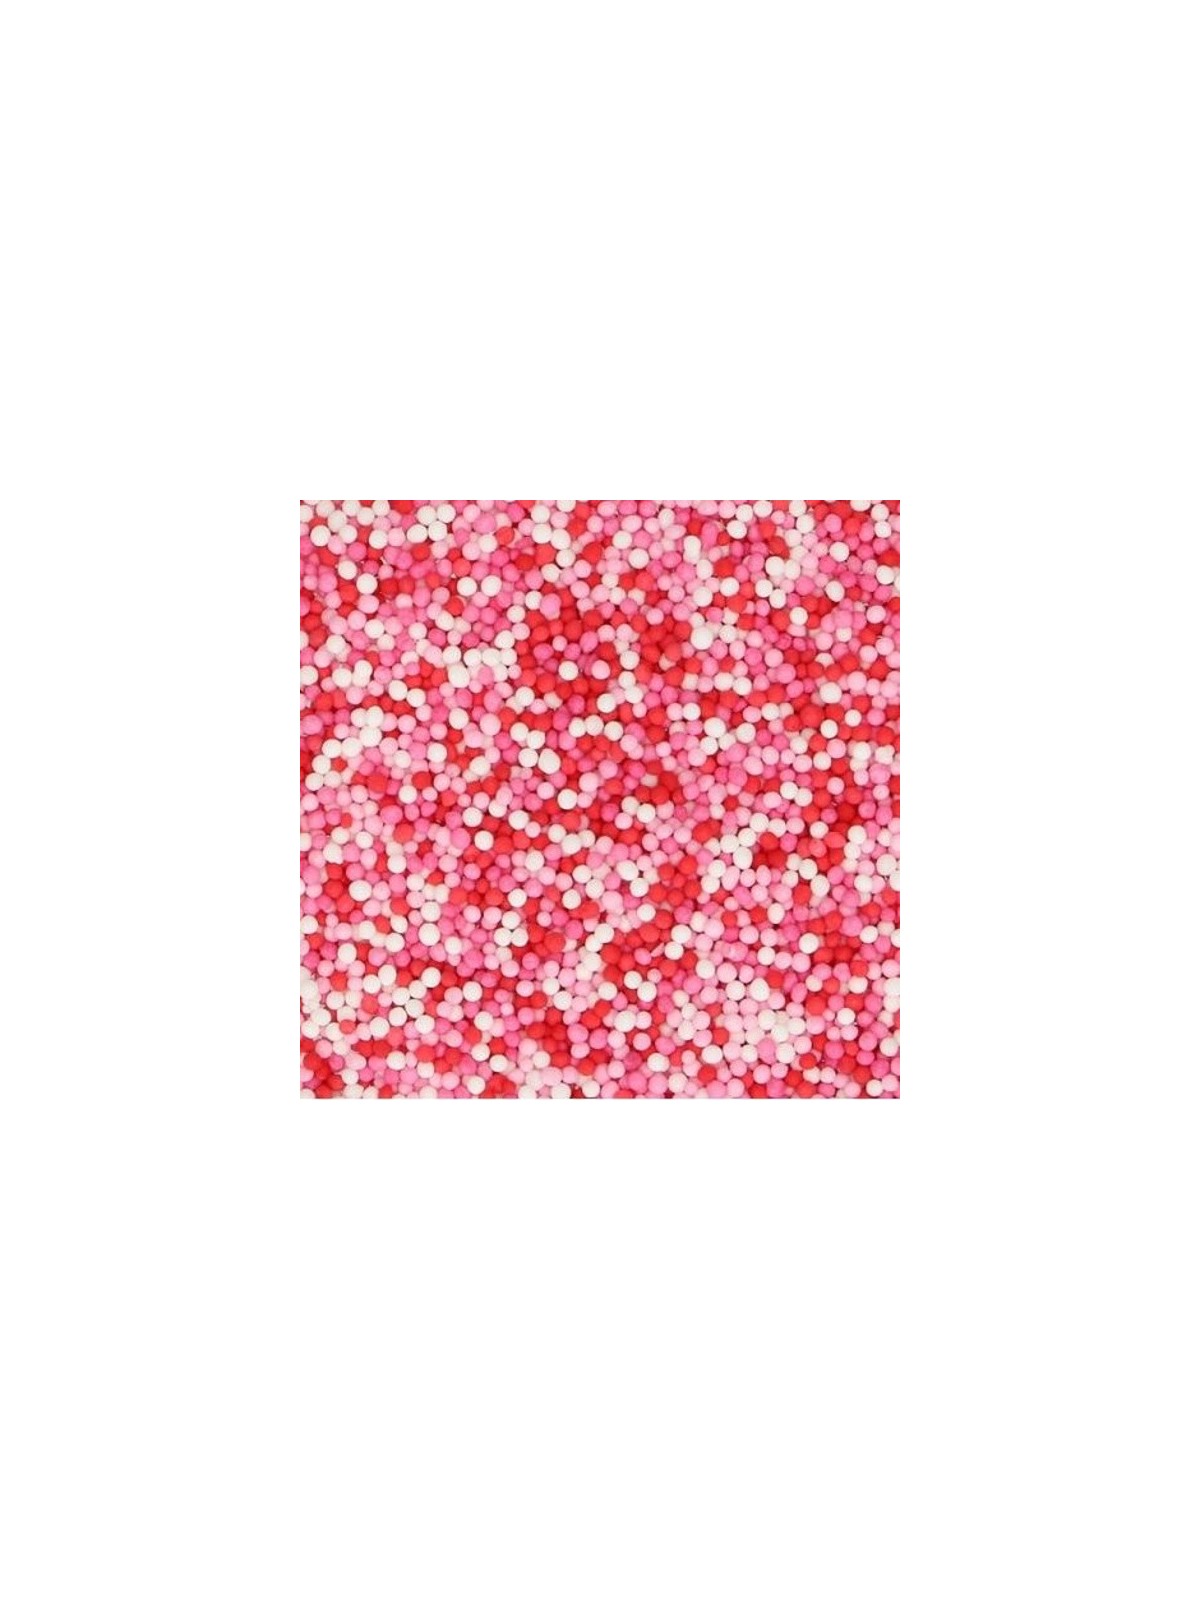 Nonpareils -Lots of Love- rot / pink / weiß - 50g